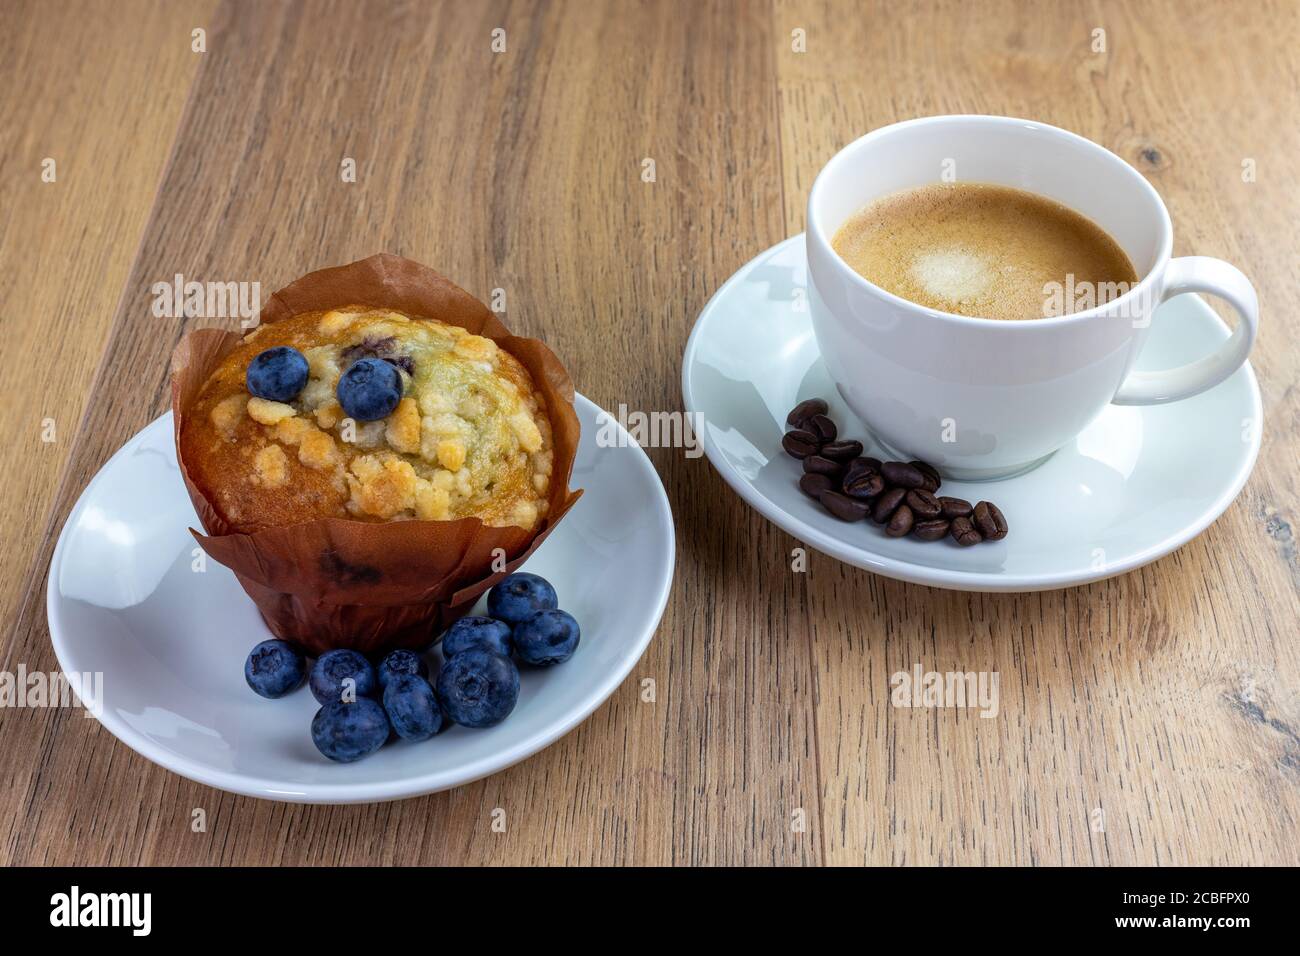 blueberry muffin and cup of coffee on wooden table Stock Photo